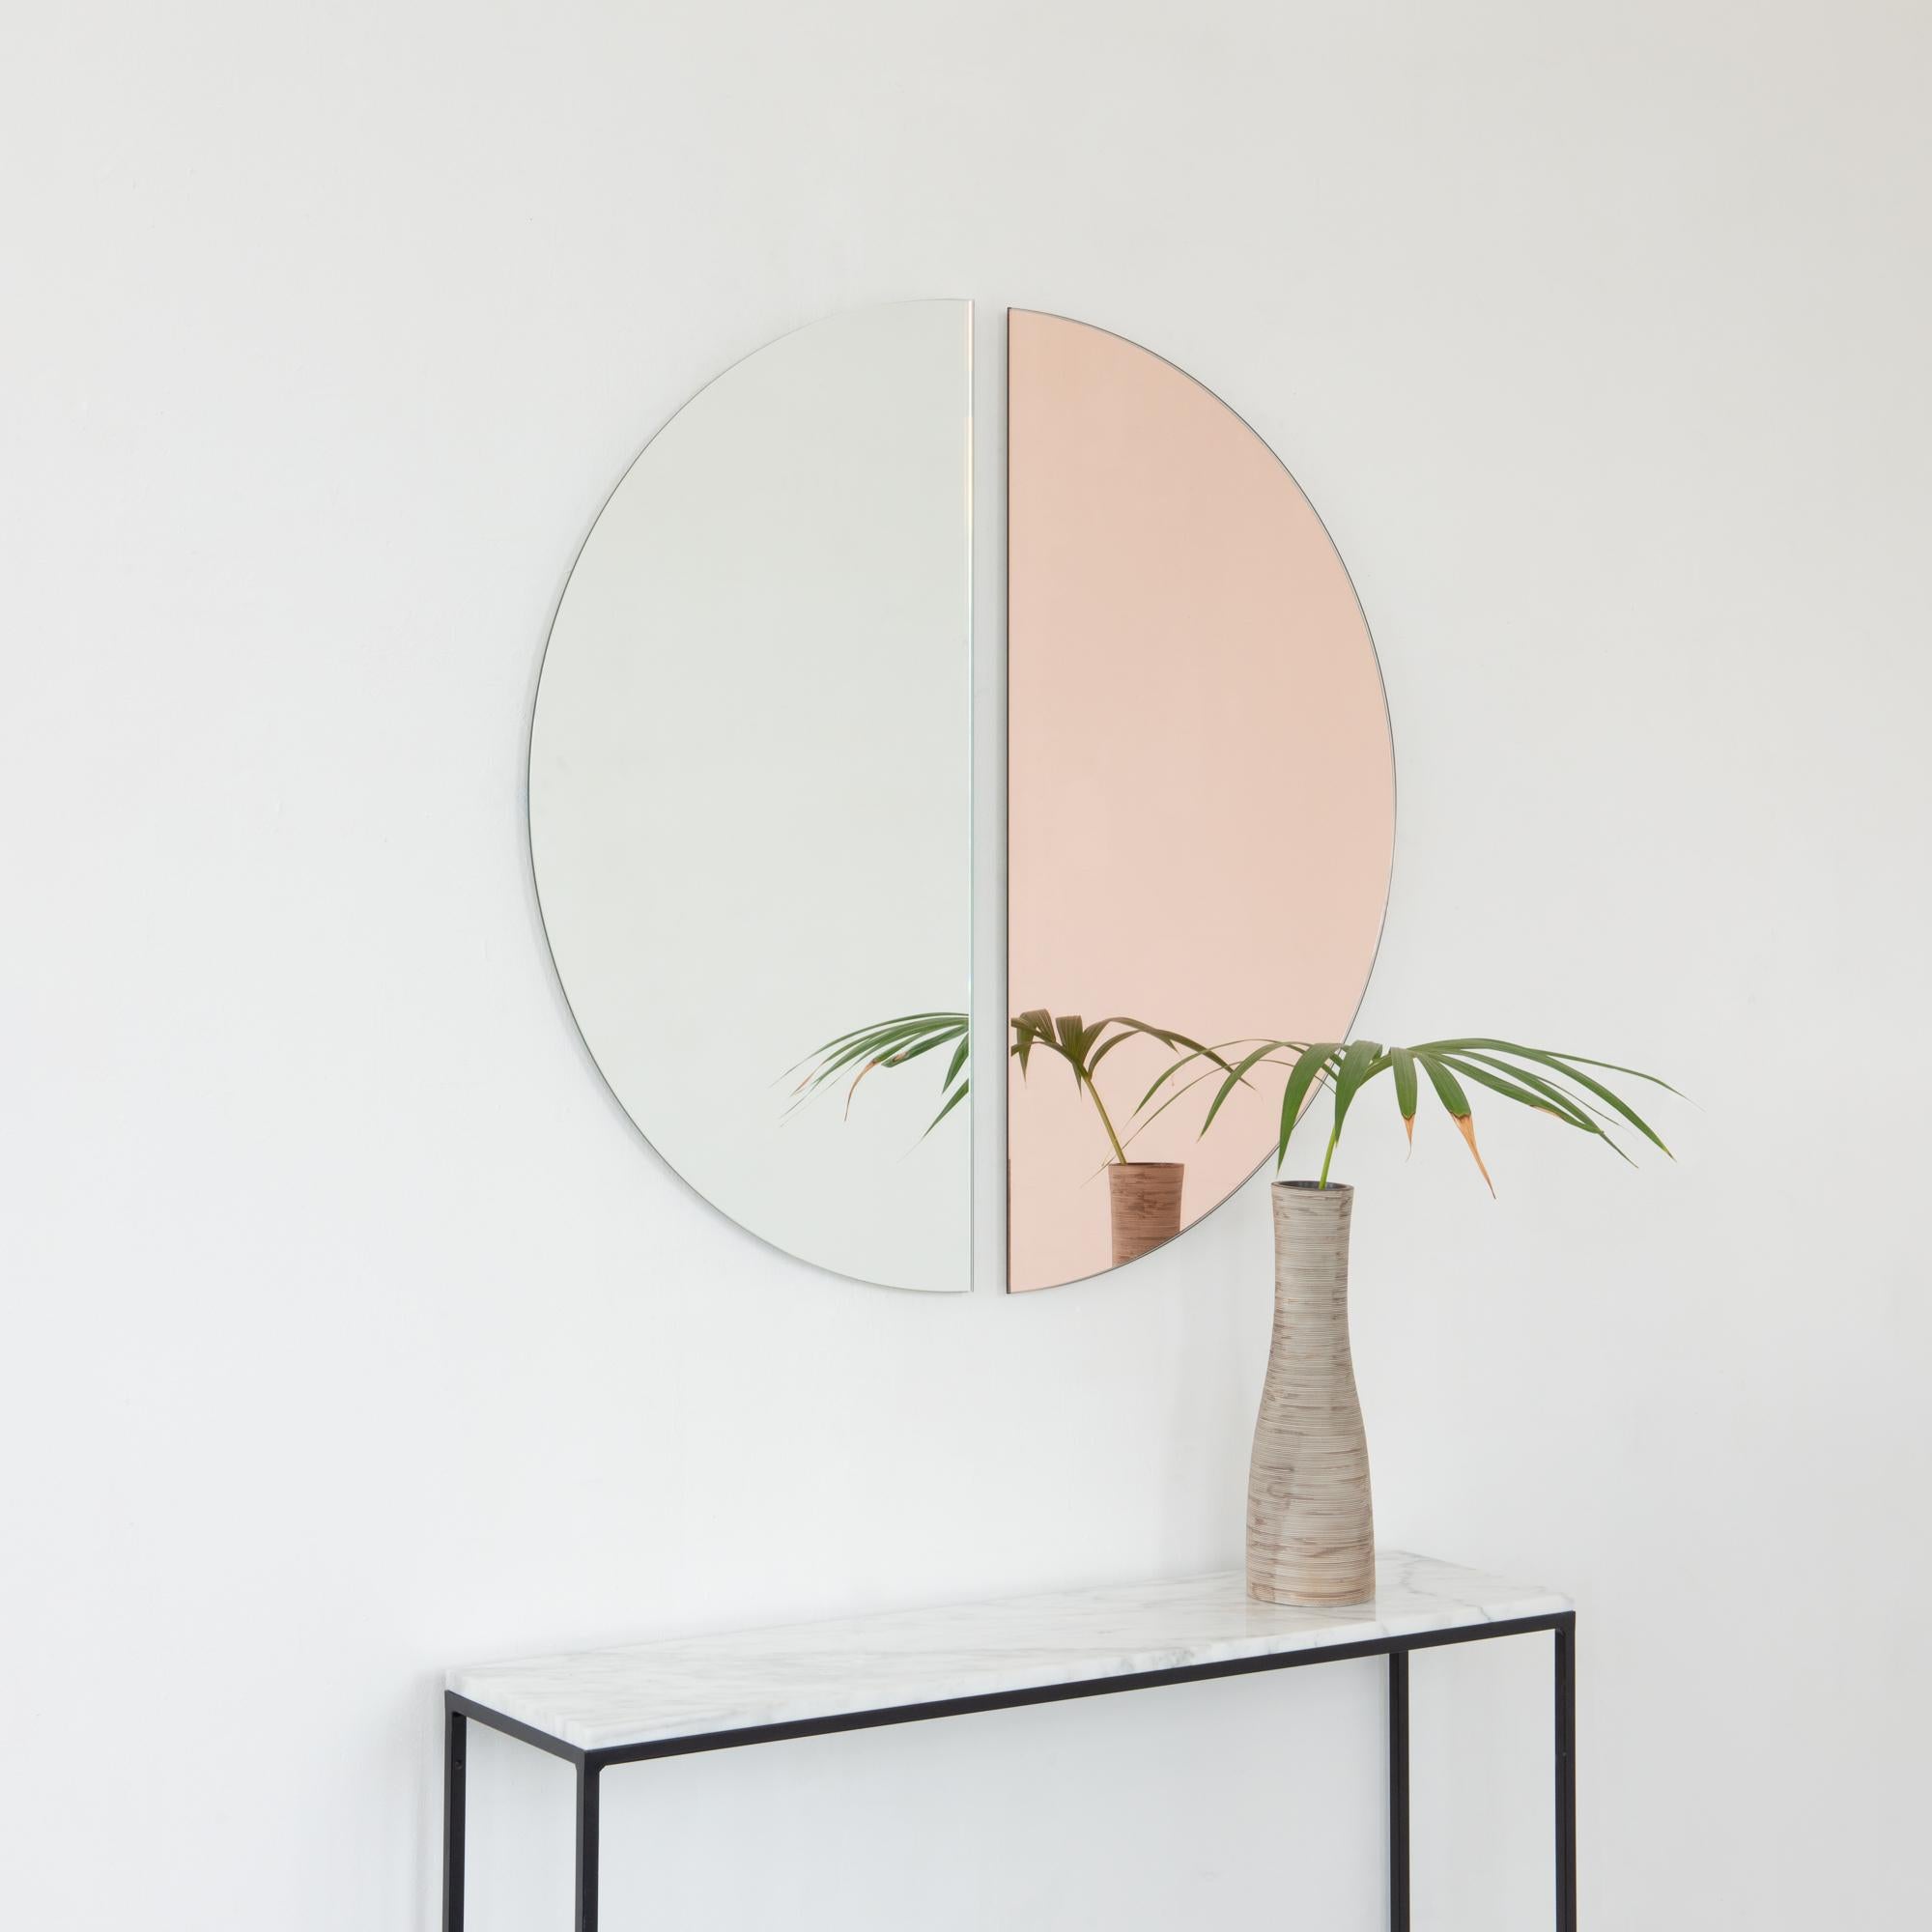 Set of two charming and minimalist rose gold (peach) and standard silver Luna™ half-moon frameless mirrors with a floating effect. Fitted with a quality hanging system for a flexible installation in 4 different directions. Designed and made in